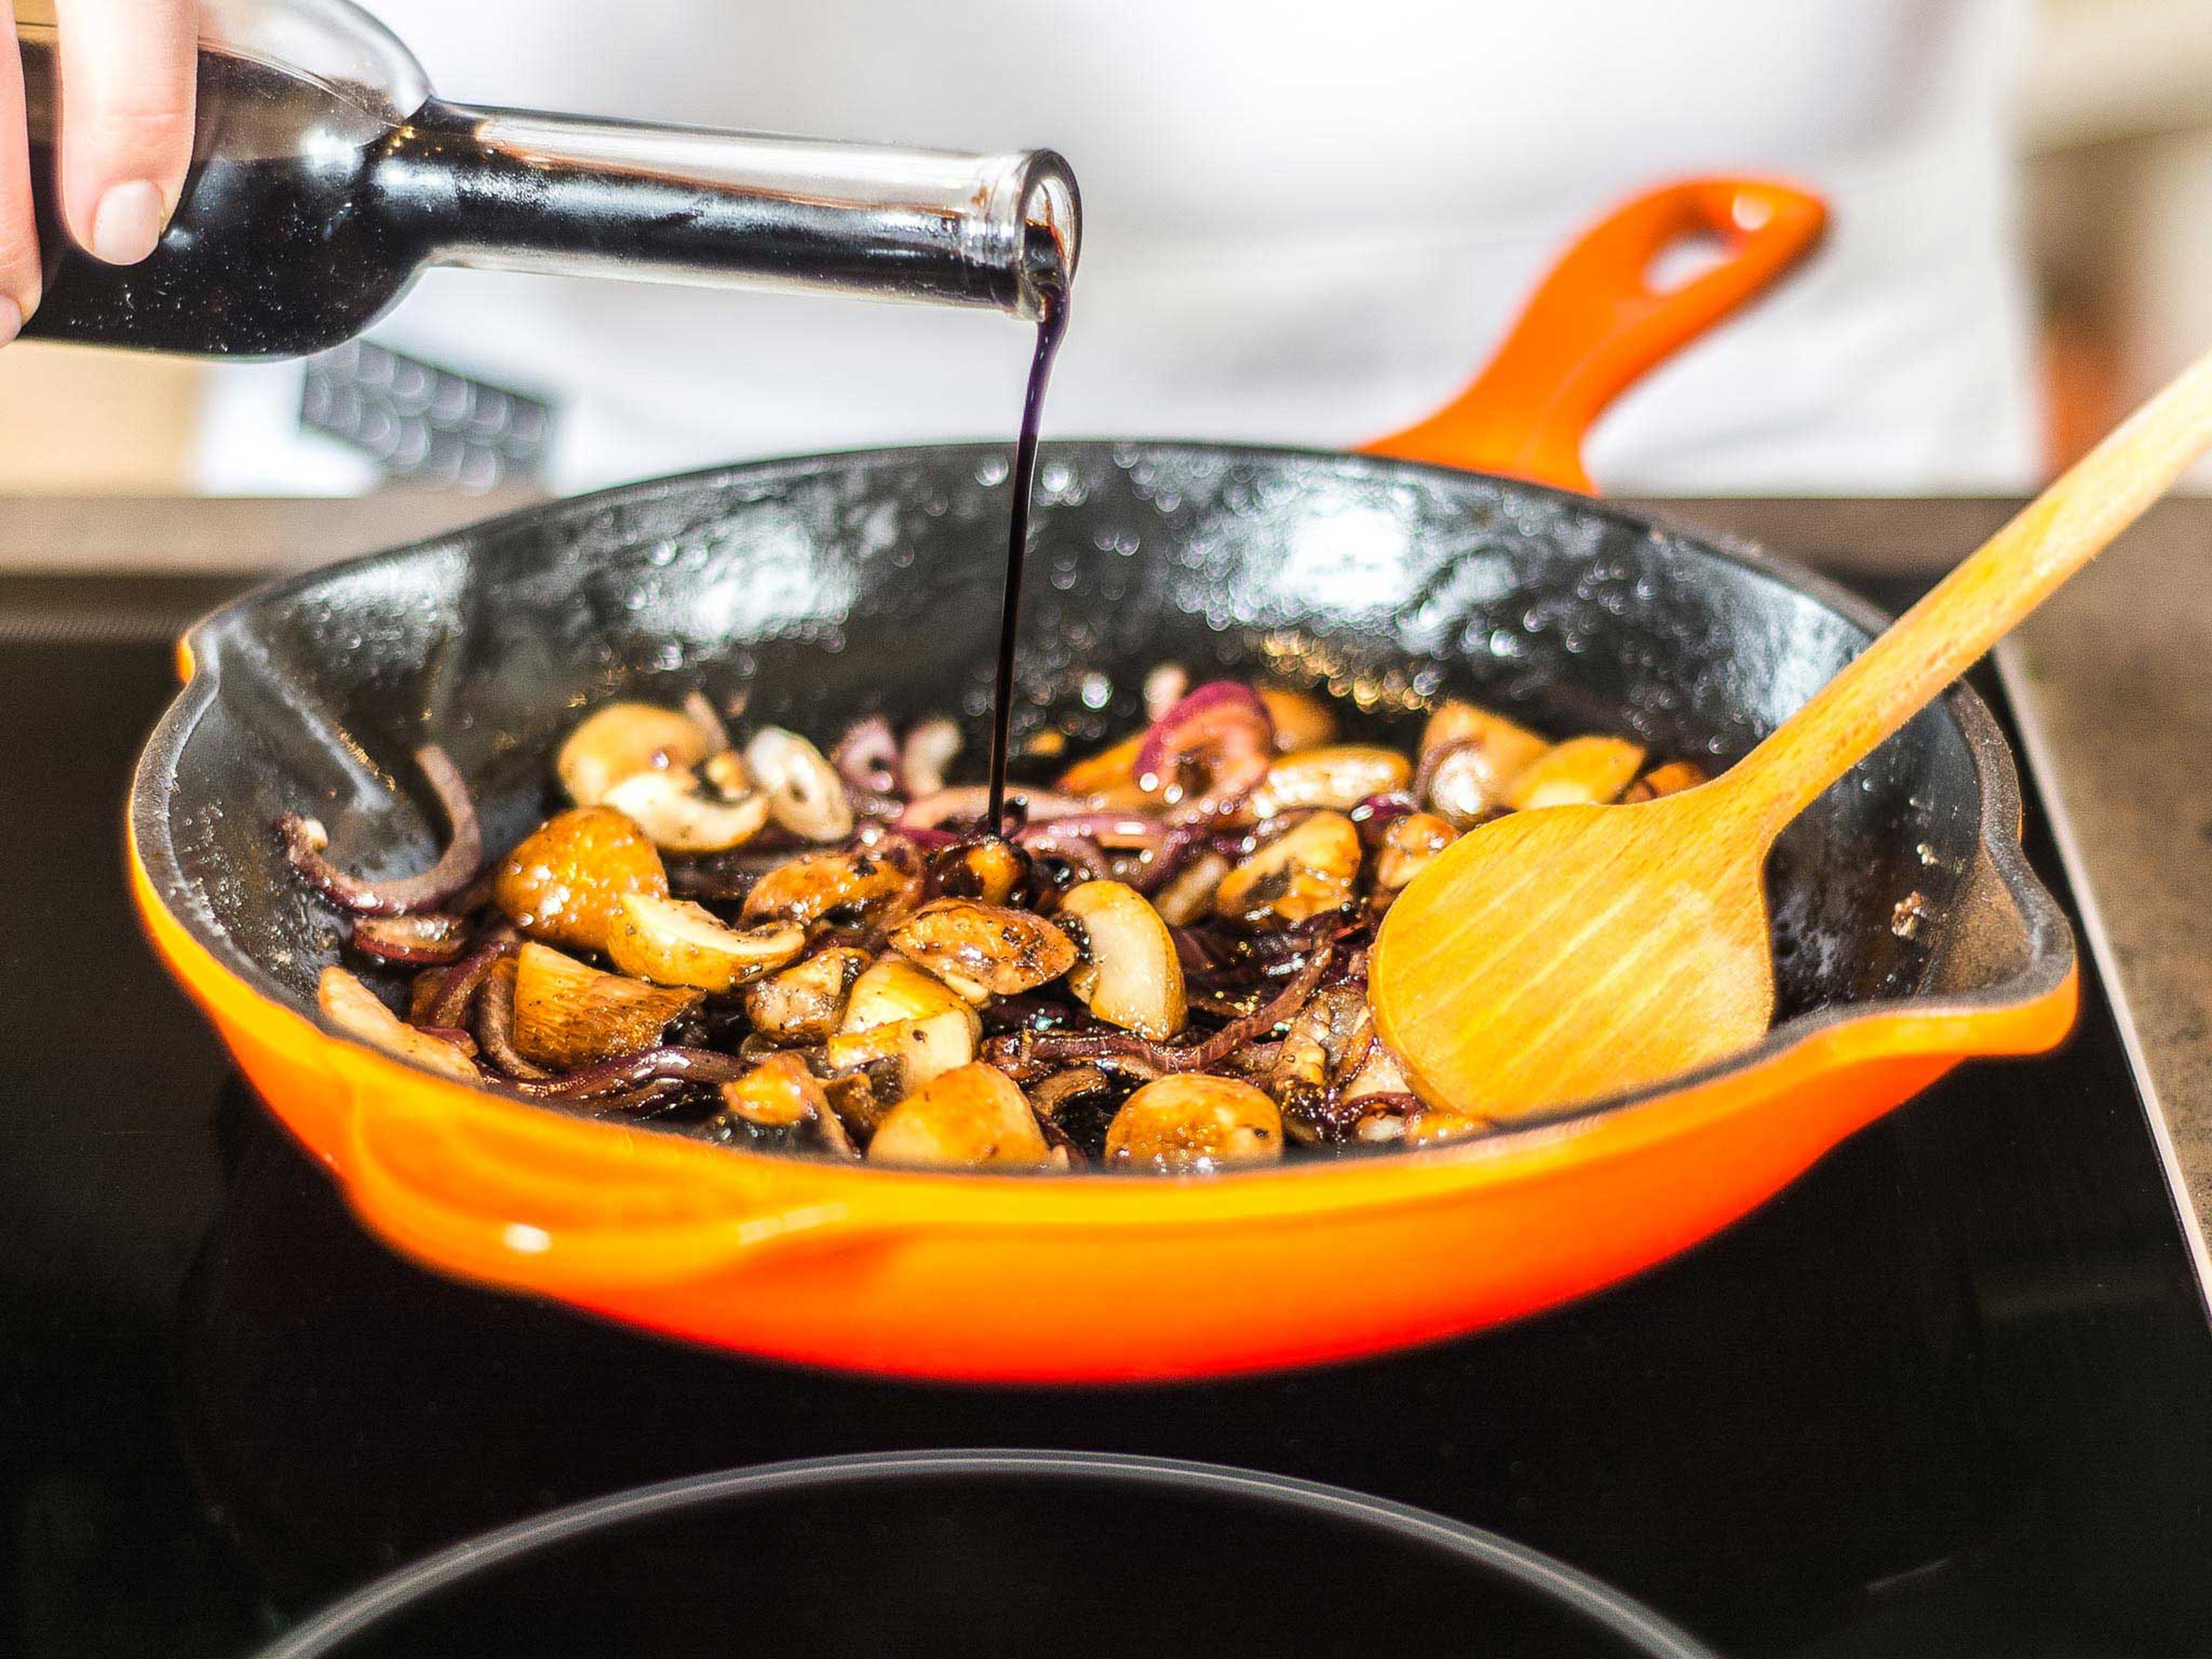 Fry onion and mushrooms in some vegetable oil. Sprinkle with a pinch of sugar and deglaze pan with balsamic vinegar. Season with salt and pepper. Allow to reduce for approx. 1 - 2 min. Top the polenta with the balsamic mushrooms and sauce.